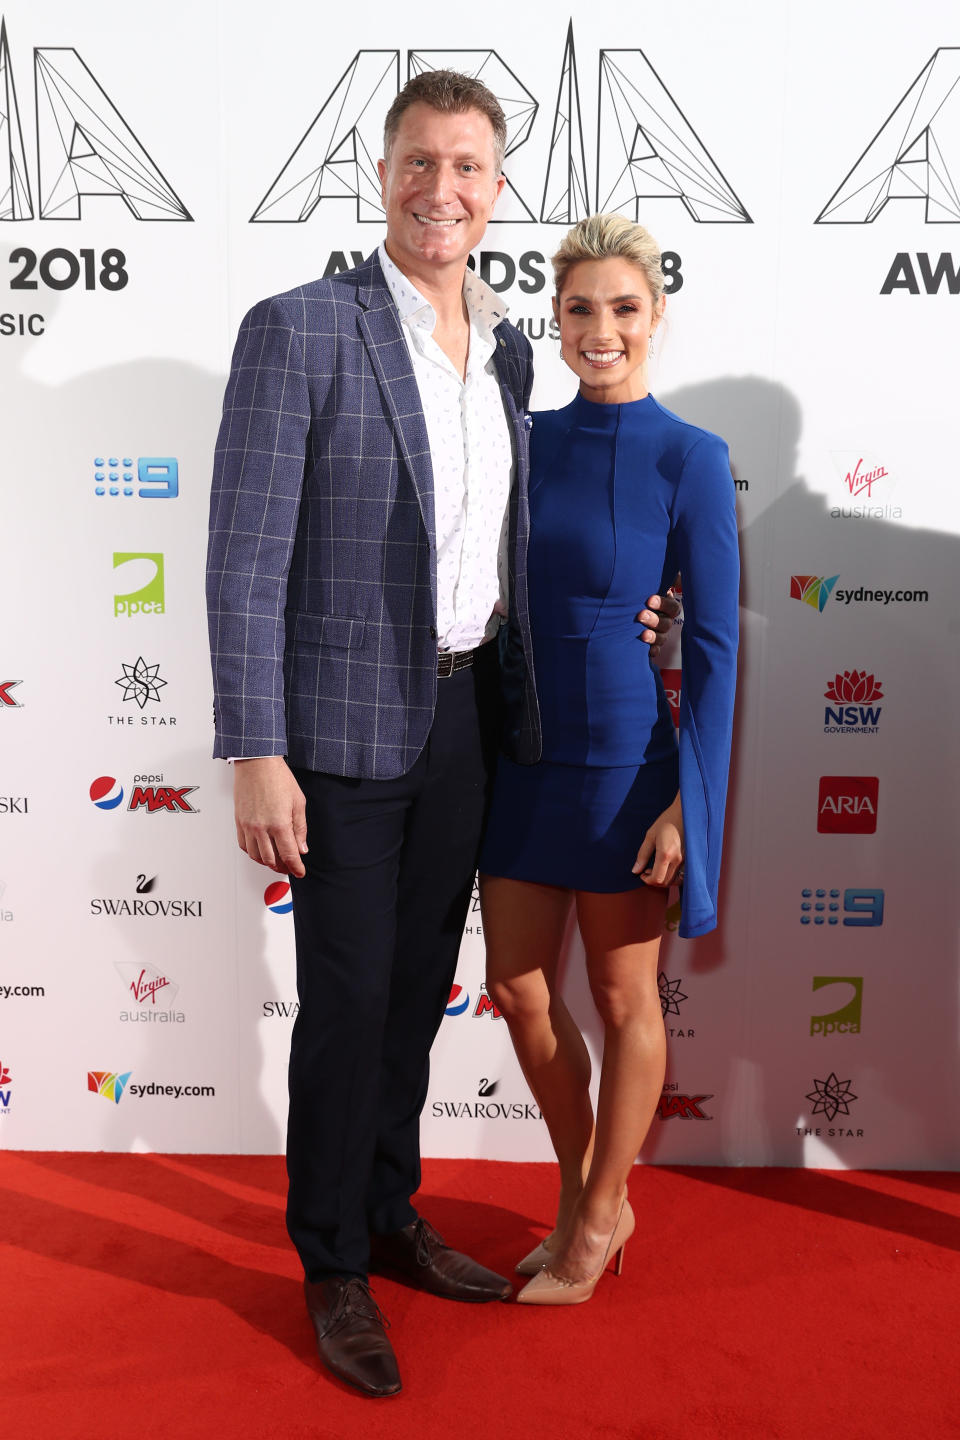 Simon Pryce (the red Wiggle) and Lauren Hannaford